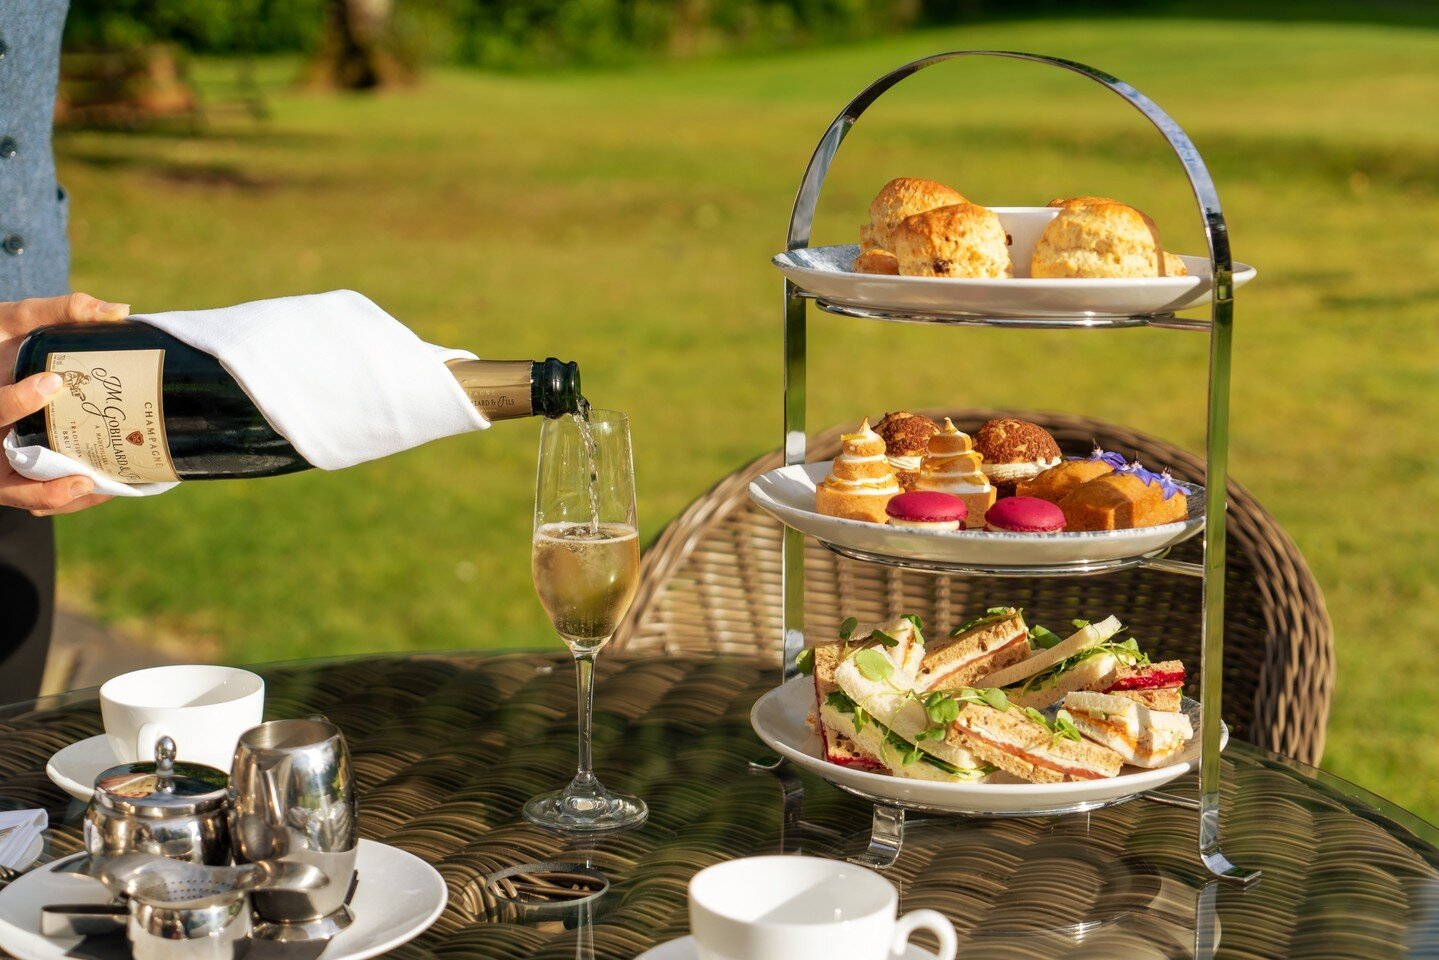 This Mother's Day, show your appreciation with a truly special treat. Join us for an exquisite Afternoon Tea that's sure to make her day unforgettable! Ramble about our extensive grounds, then warm up next to one of our open fires - go on, she deserv